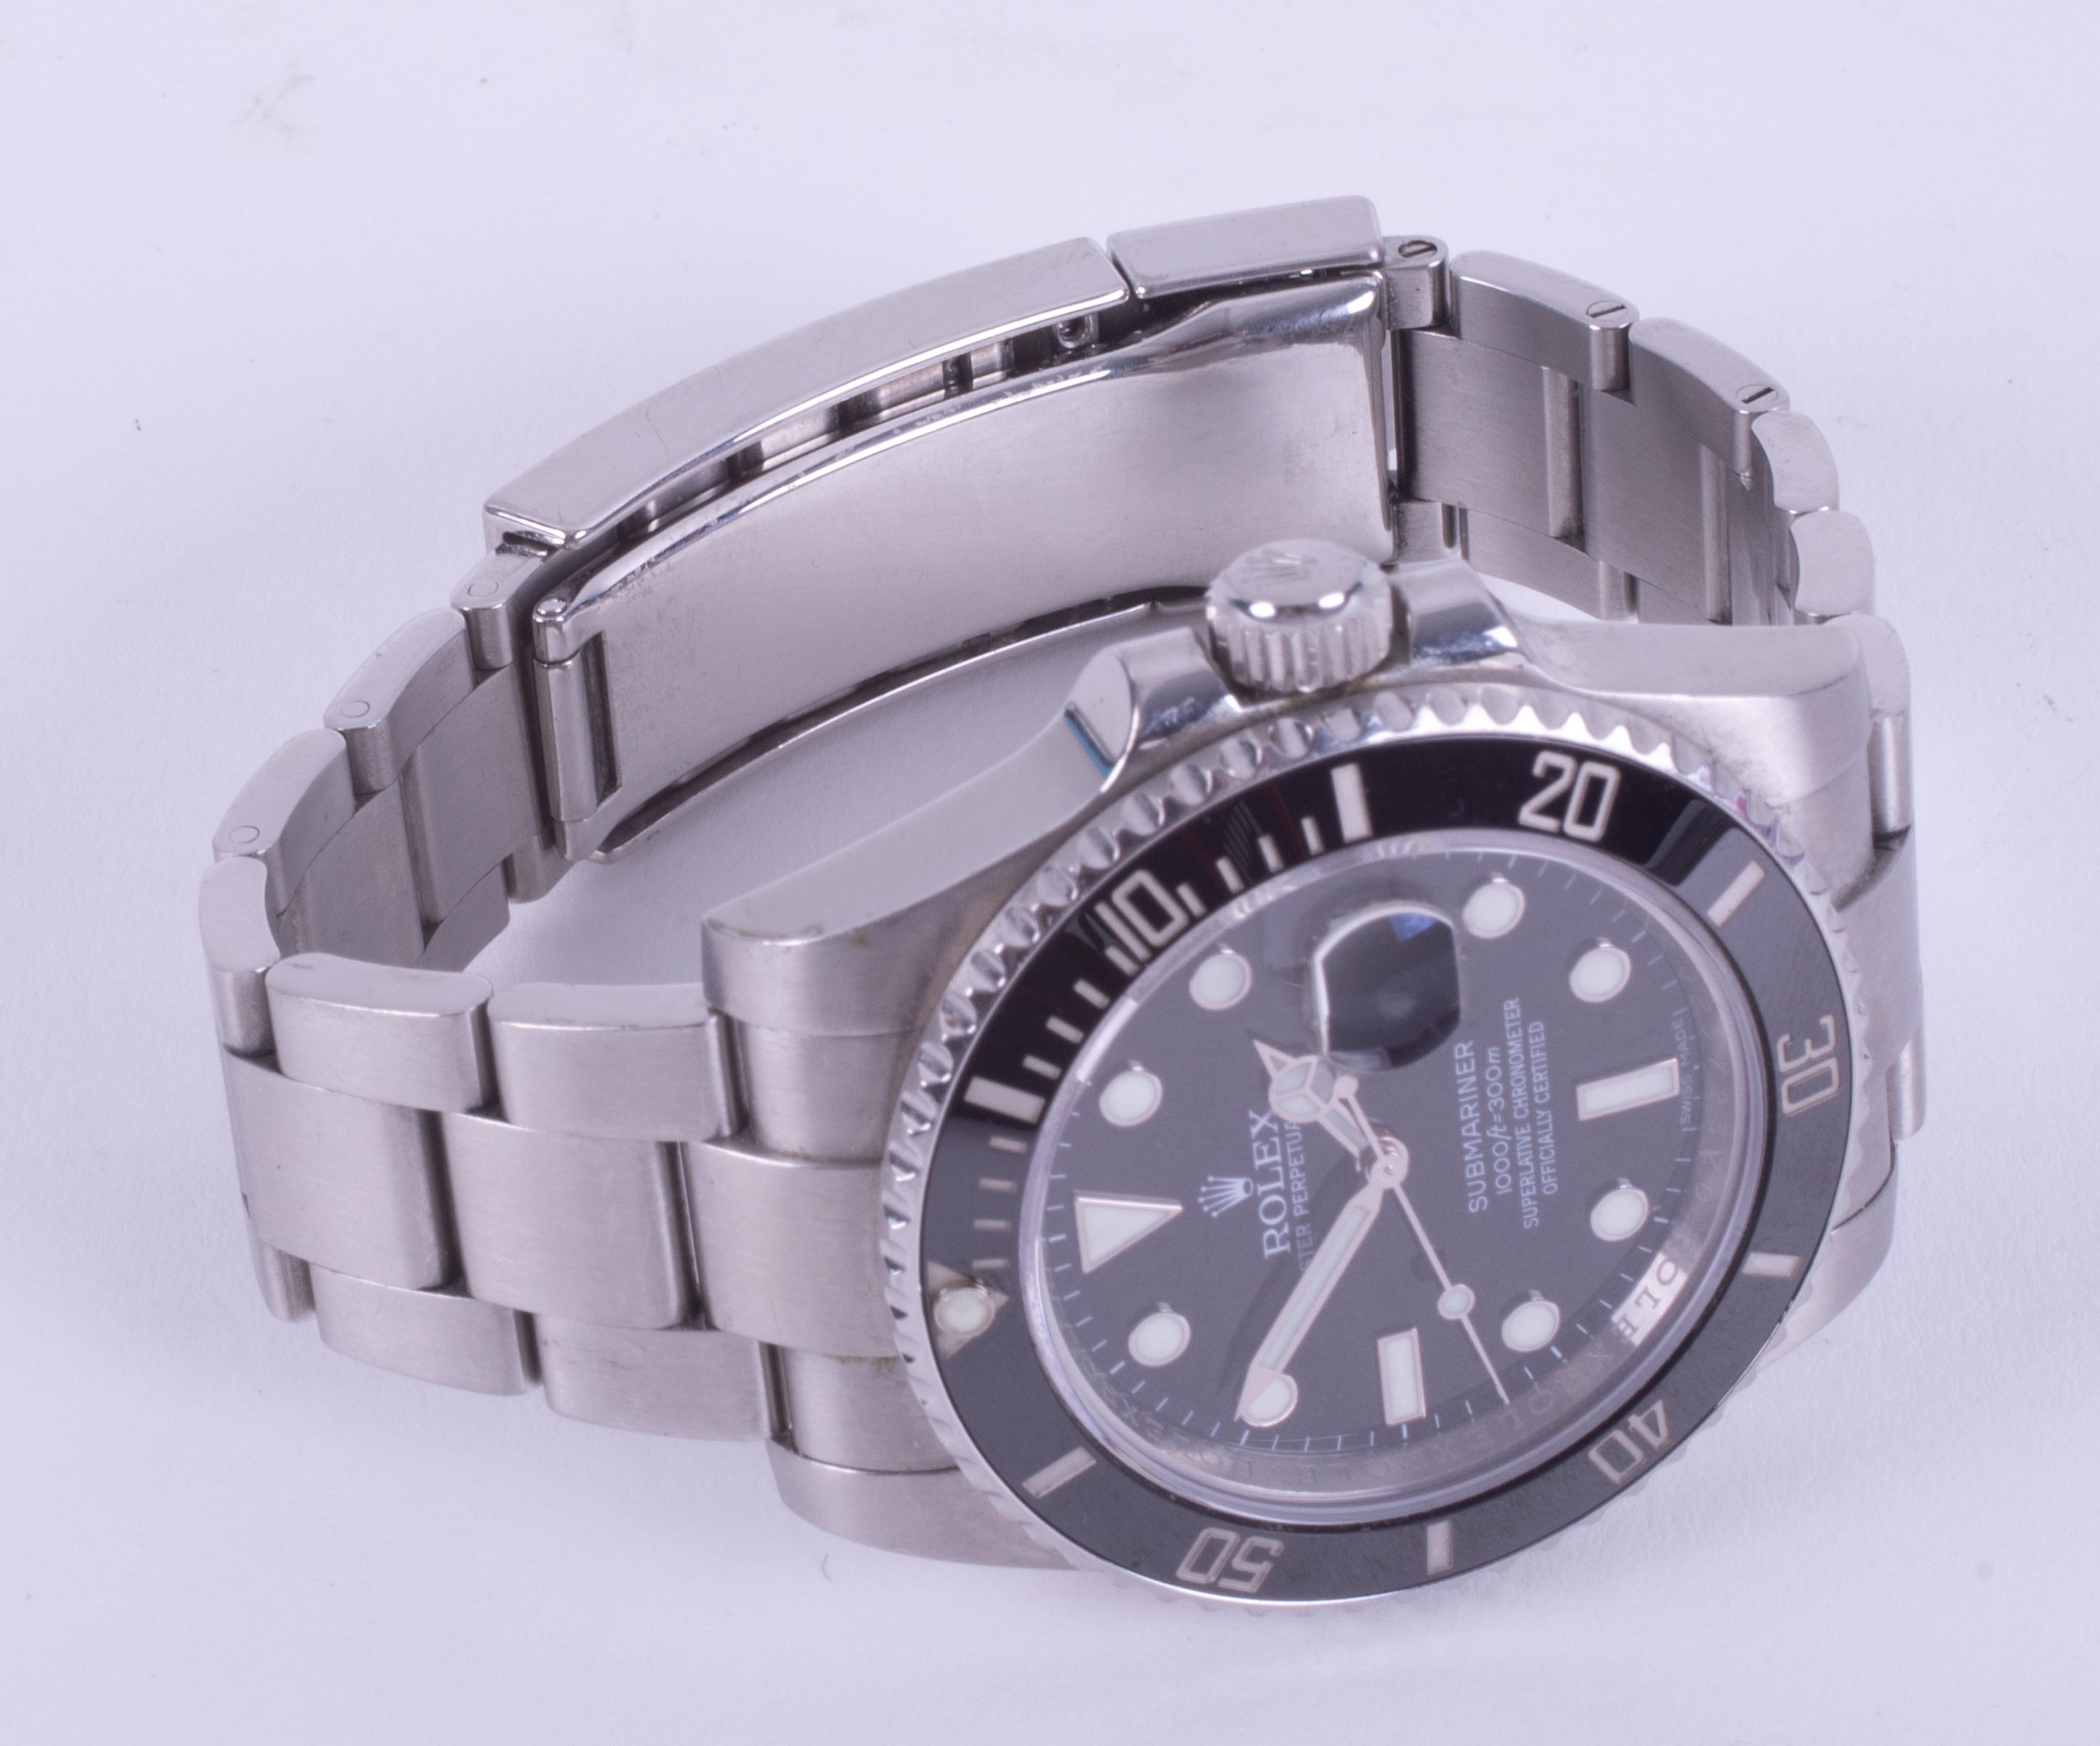 Rolex, a gent's Rolex Oyster Perpetual Submariner stainless steel automatic wristwatch with date - Image 7 of 7